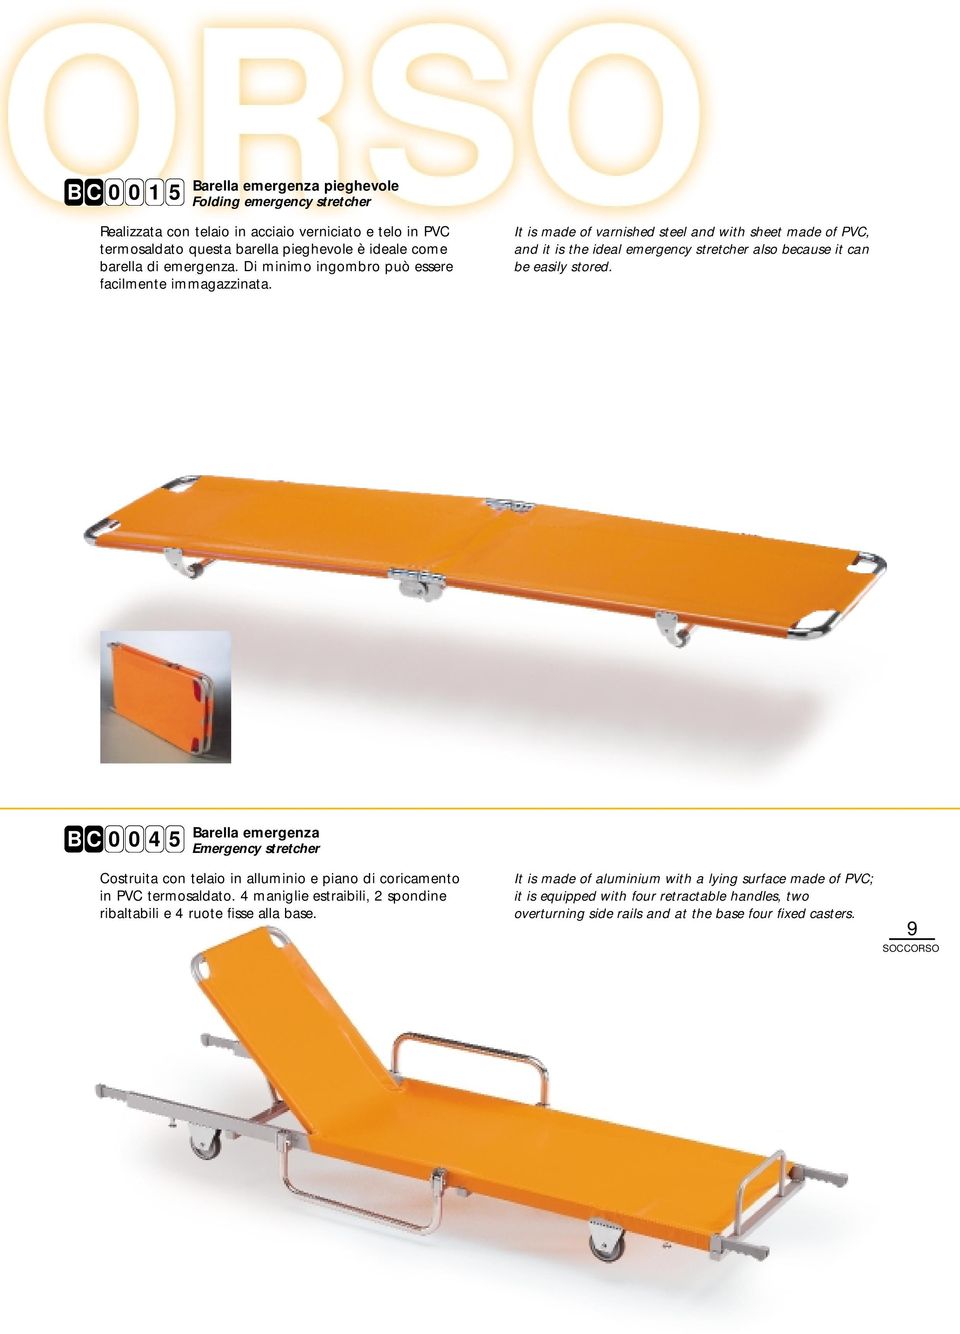 It is made of varnished steel and with sheet made of PVC, and it is the ideal emergency stretcher also because it can be easily stored.